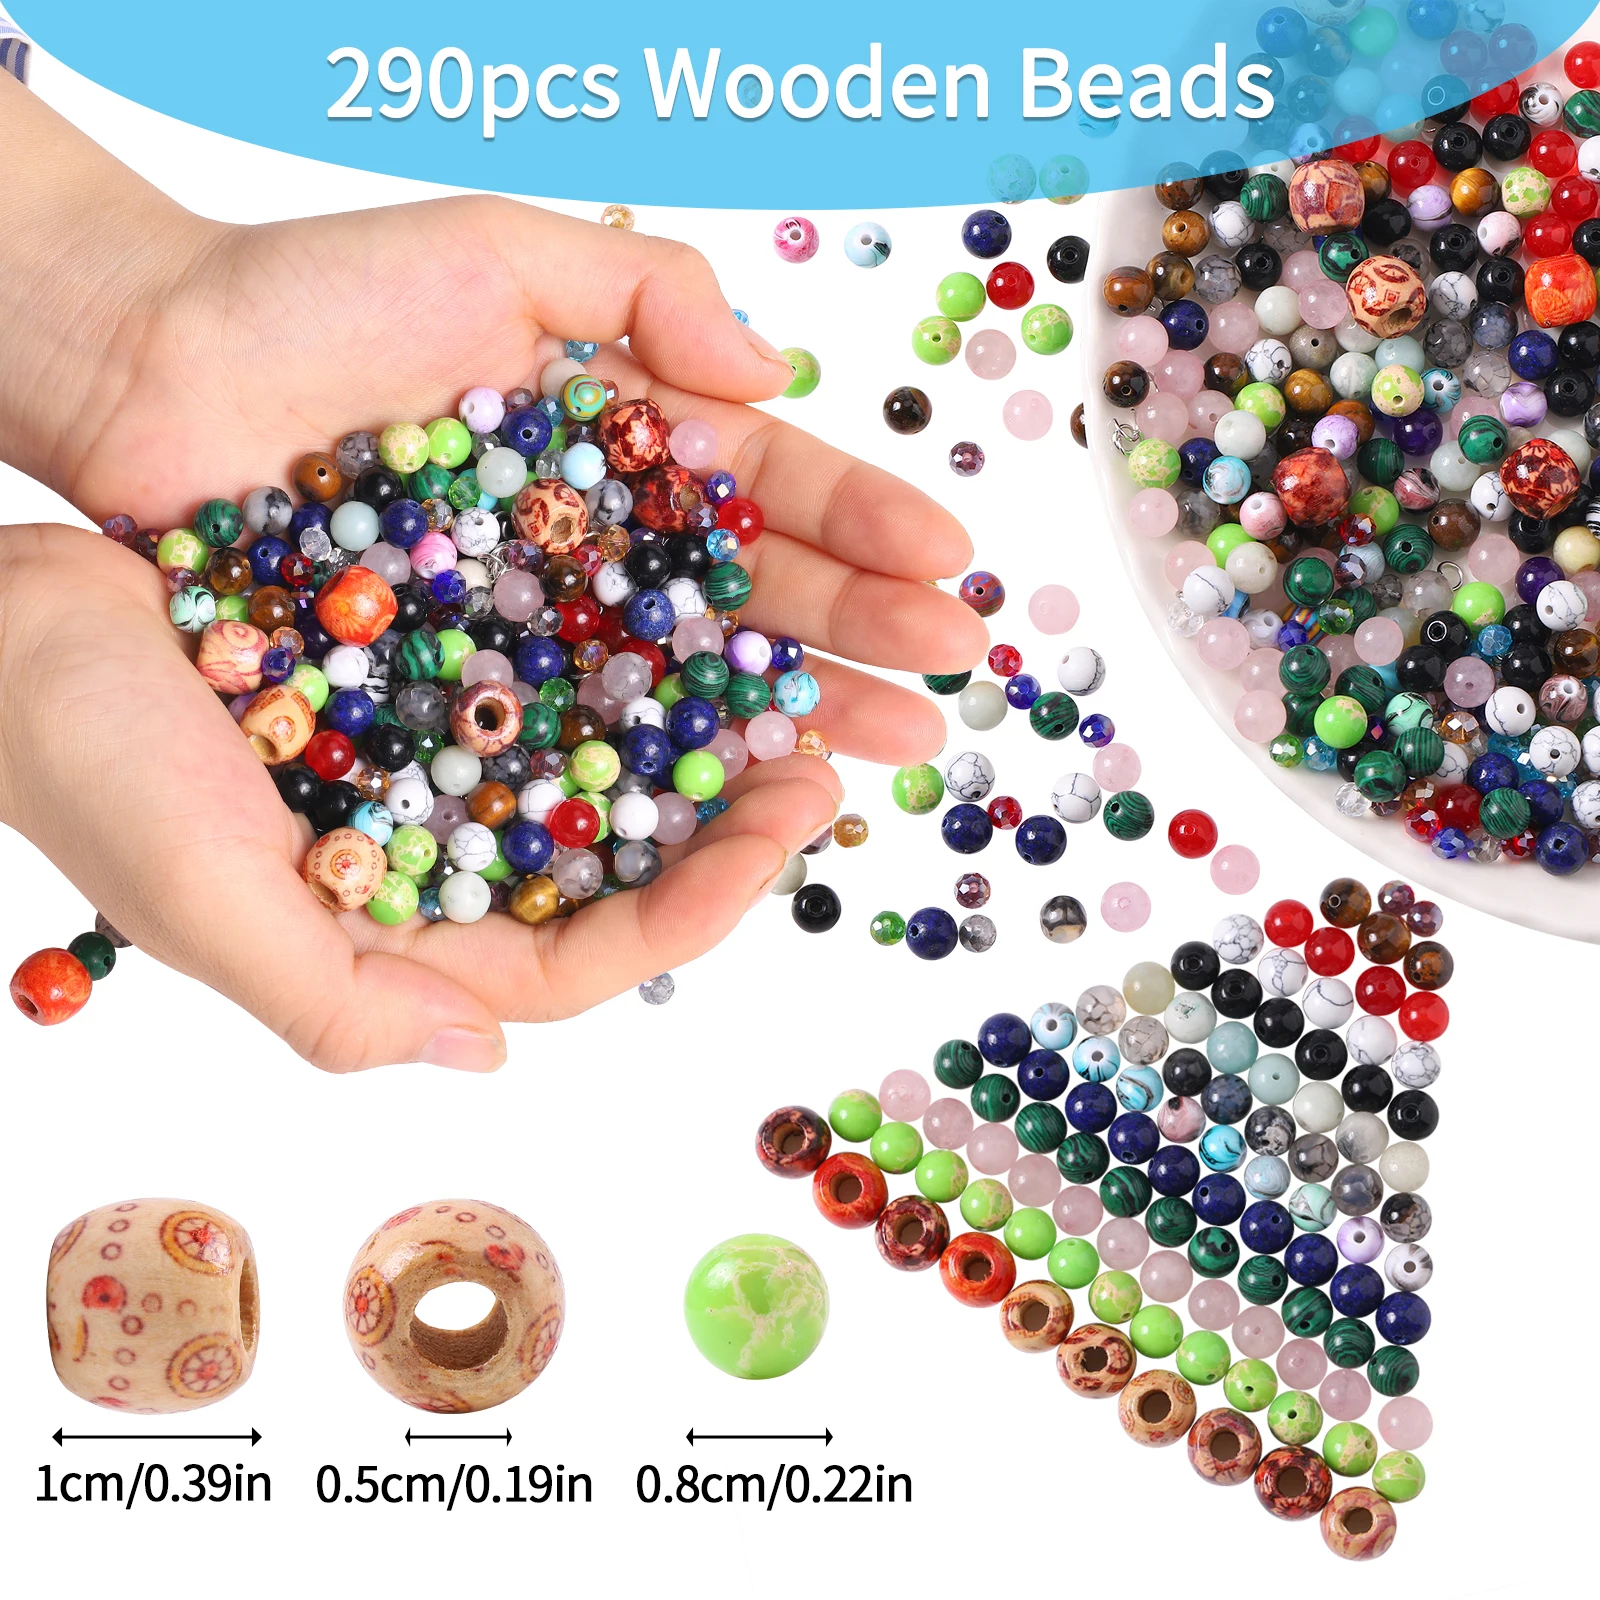 290pcs Wood Handmade DIY Mixed Alphabet Letter Beads send tools Charms Beads for Making Jewelry Handmade Bracelets Accessories